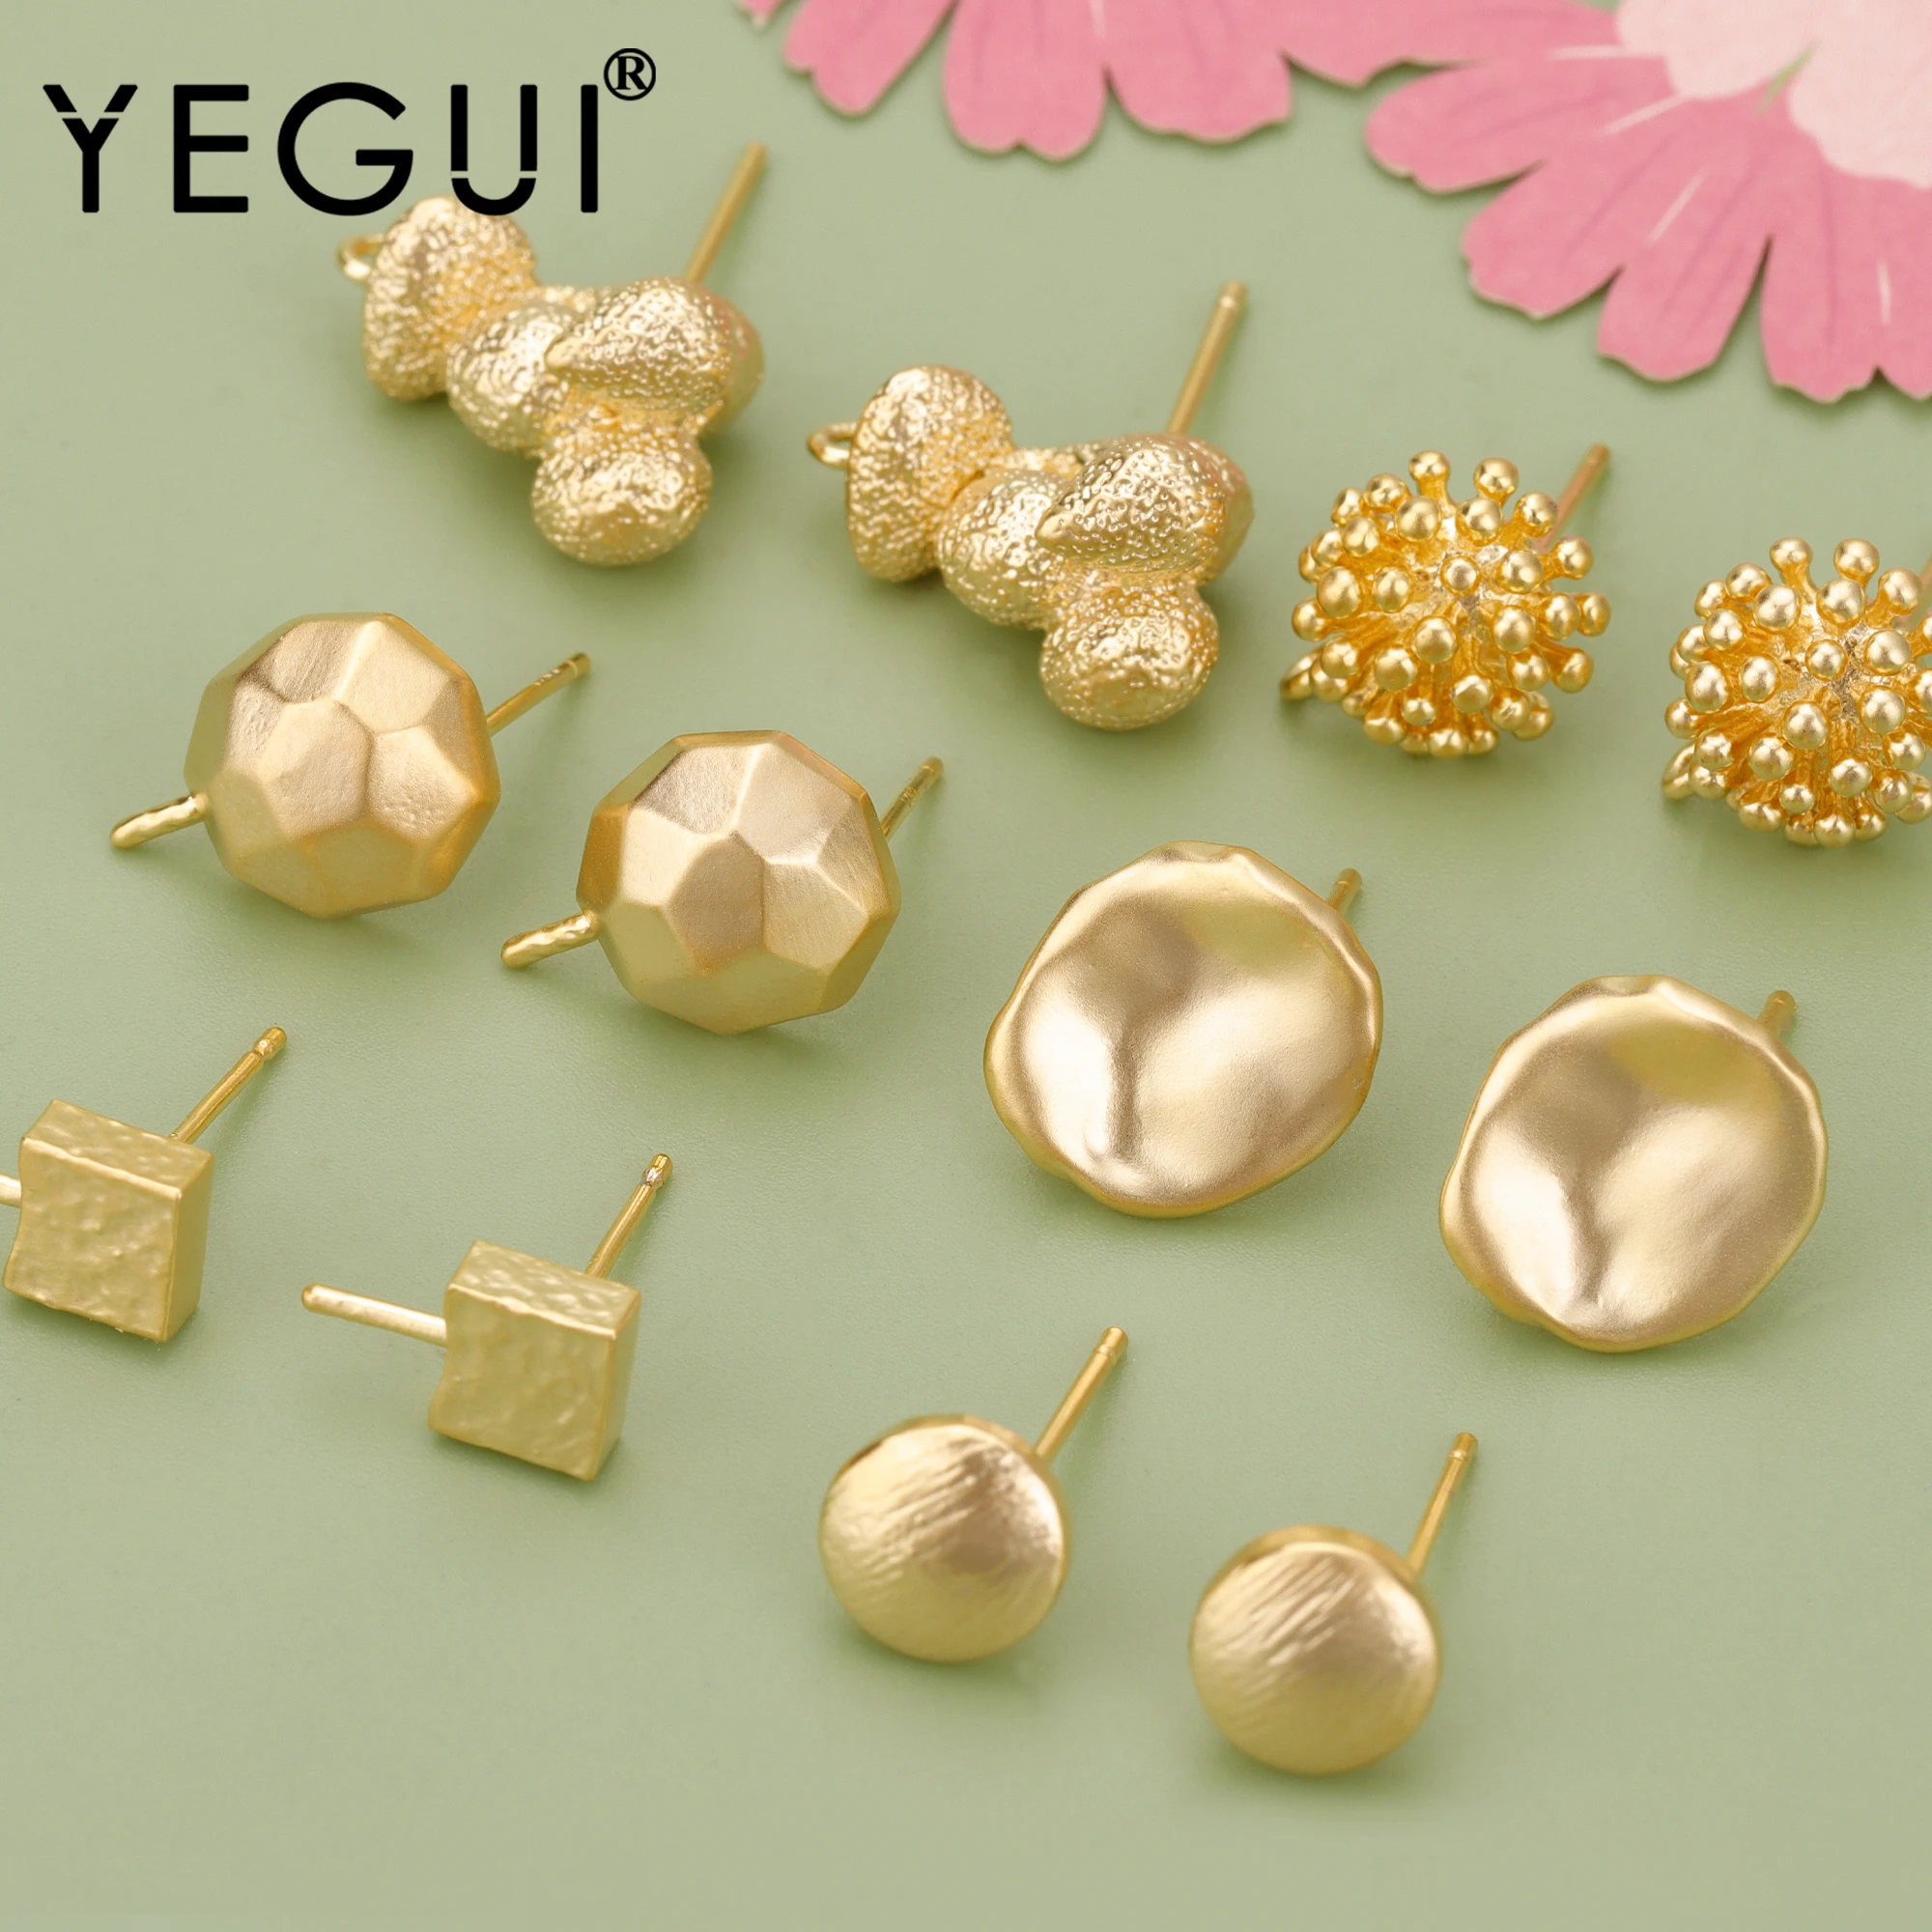 

YEGUI MD58,jewelry accessories,18k gold rhodium plated,copper,nickel free,hand made,charms,jewelry making,diy earrings,6pcs/lot